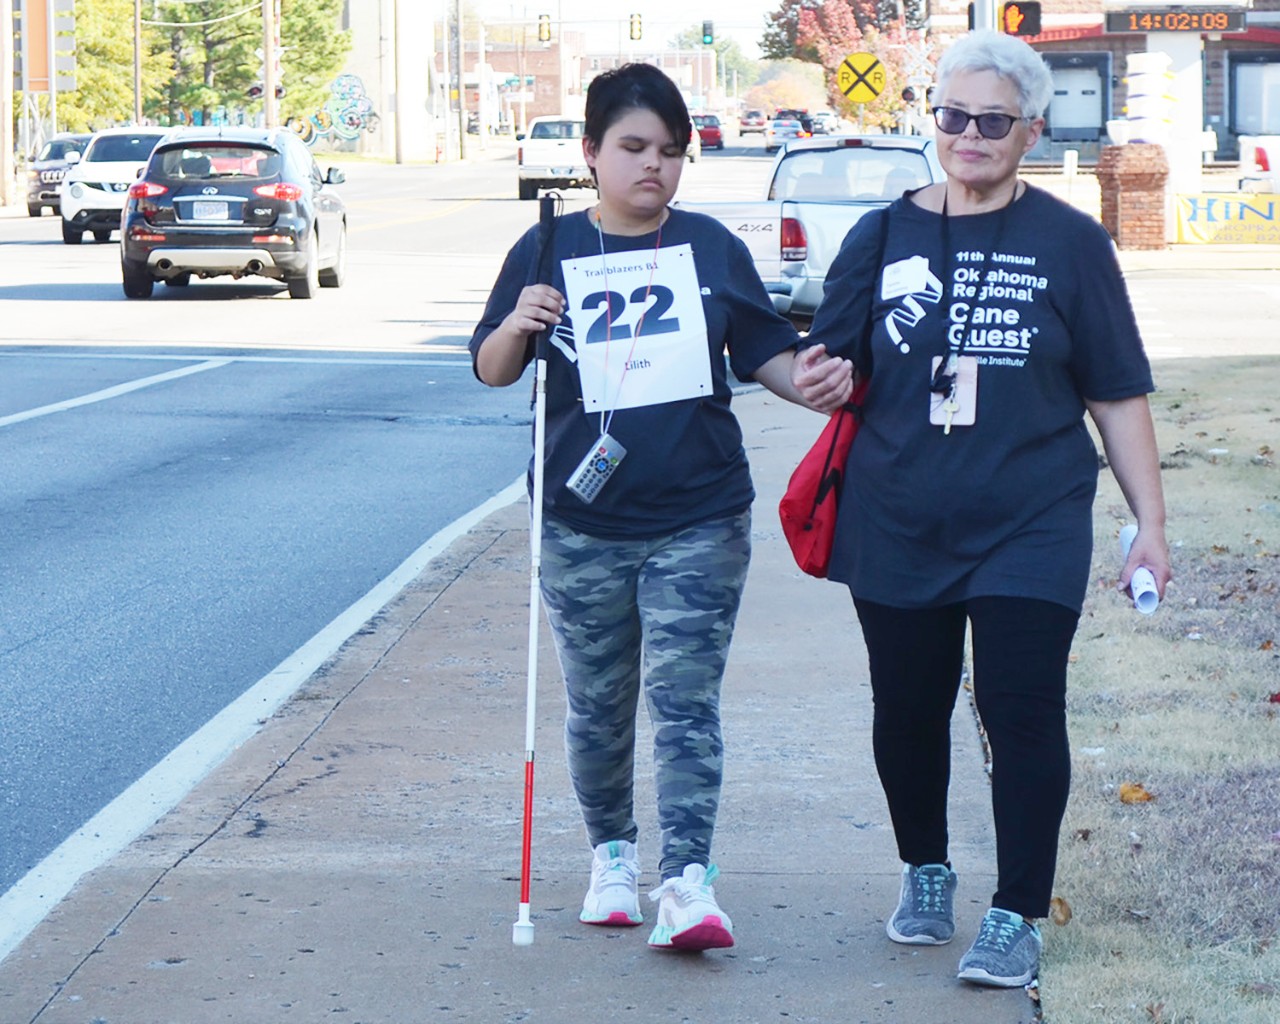 Young woman with white cane and 22 sign on chest walks with woman.